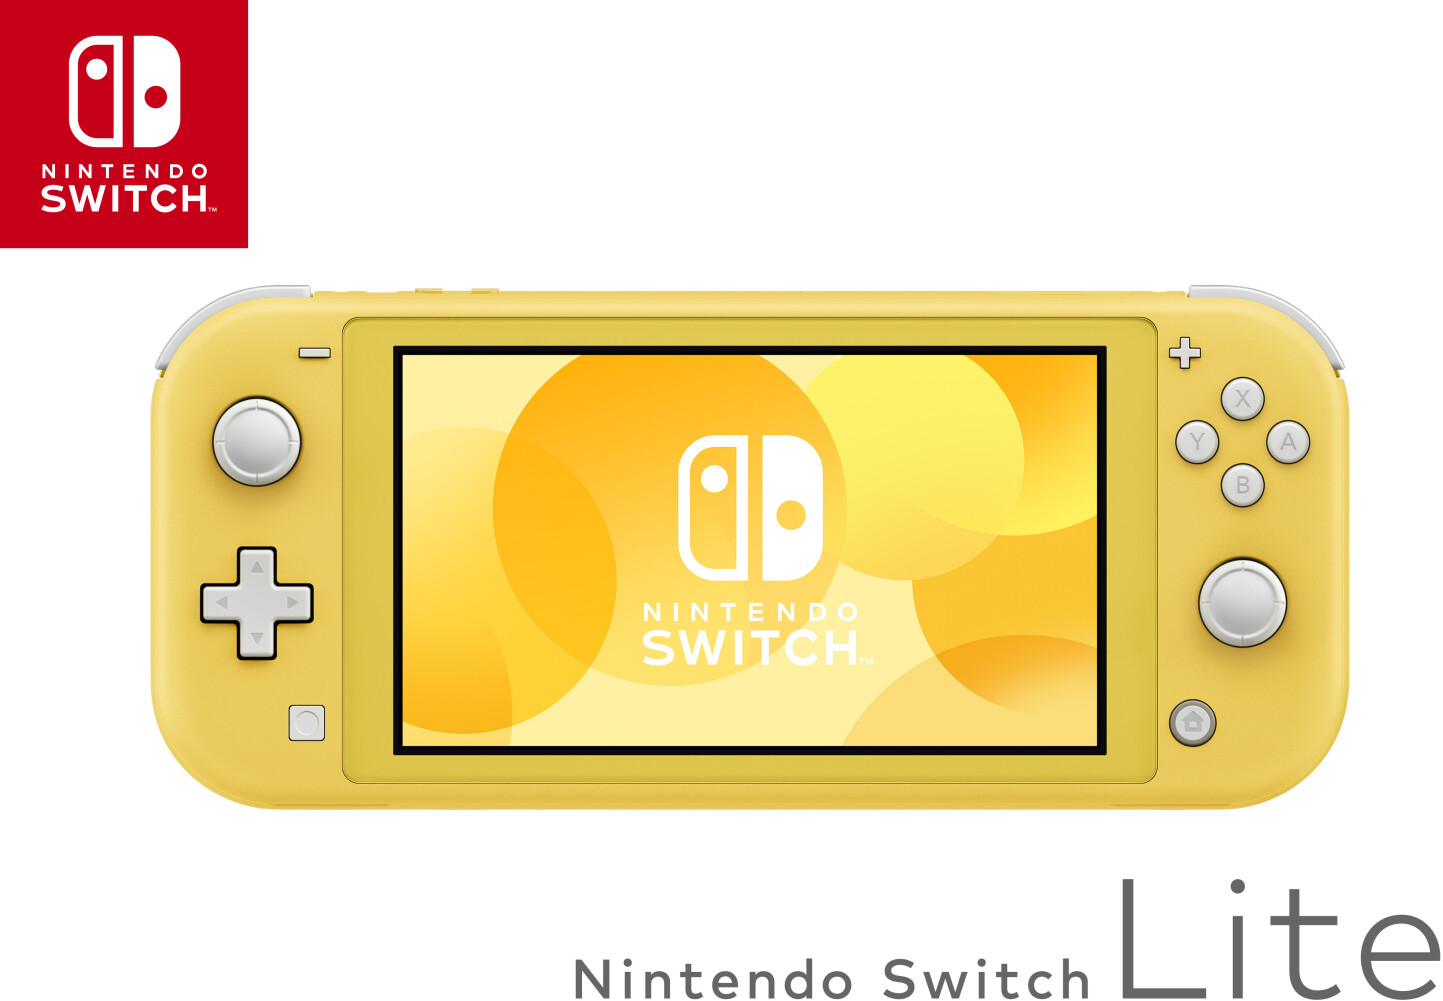 Pack Nintendo Switch + Mario Kart 8 Deluxe moins cher à 299,99 €